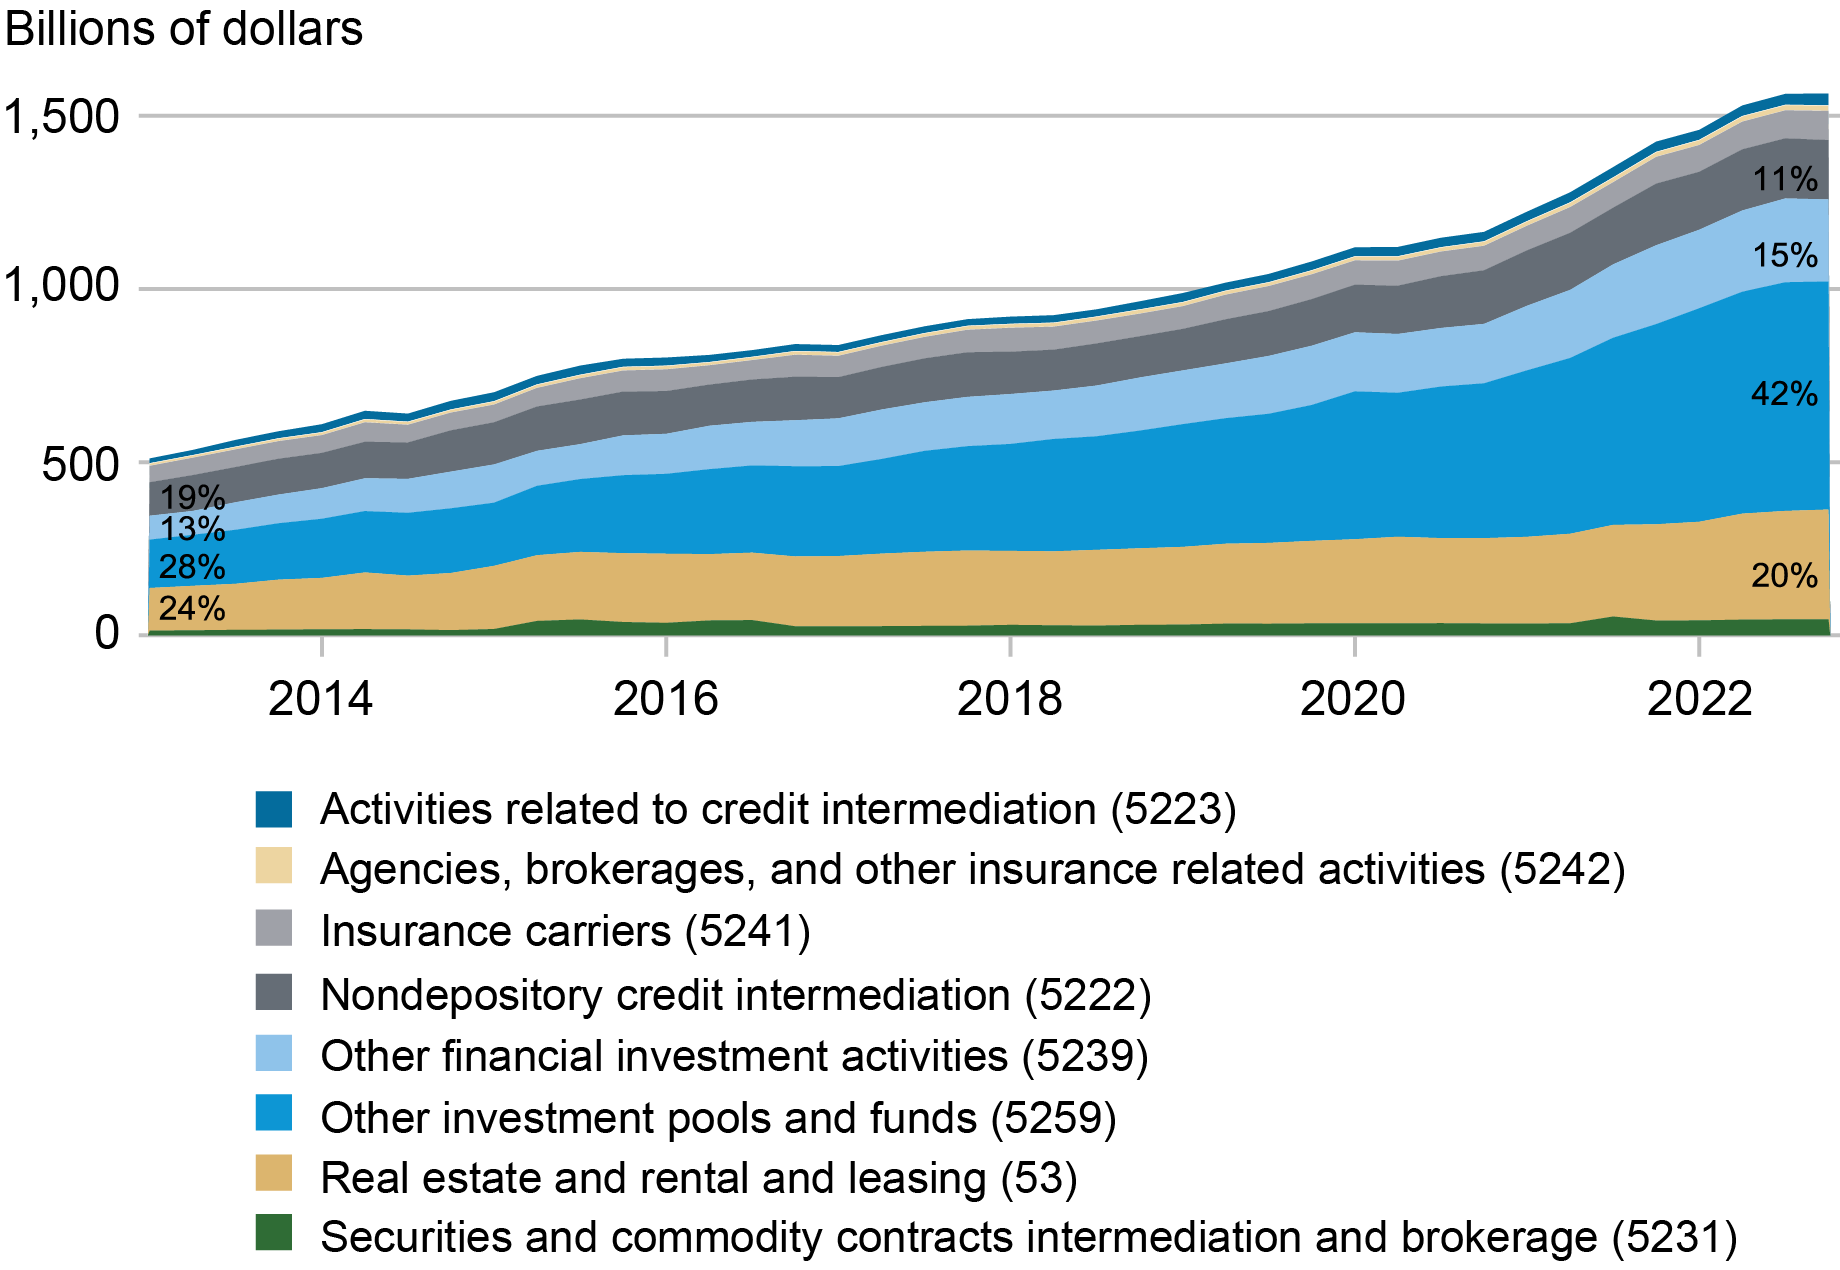 area chart tracking NBFI credit lines in billions of dollars from the first quarter of 2013 to the first quarter of 2023 – with the largest percentage in 2023 being other investment pools and funds at 42 percent.